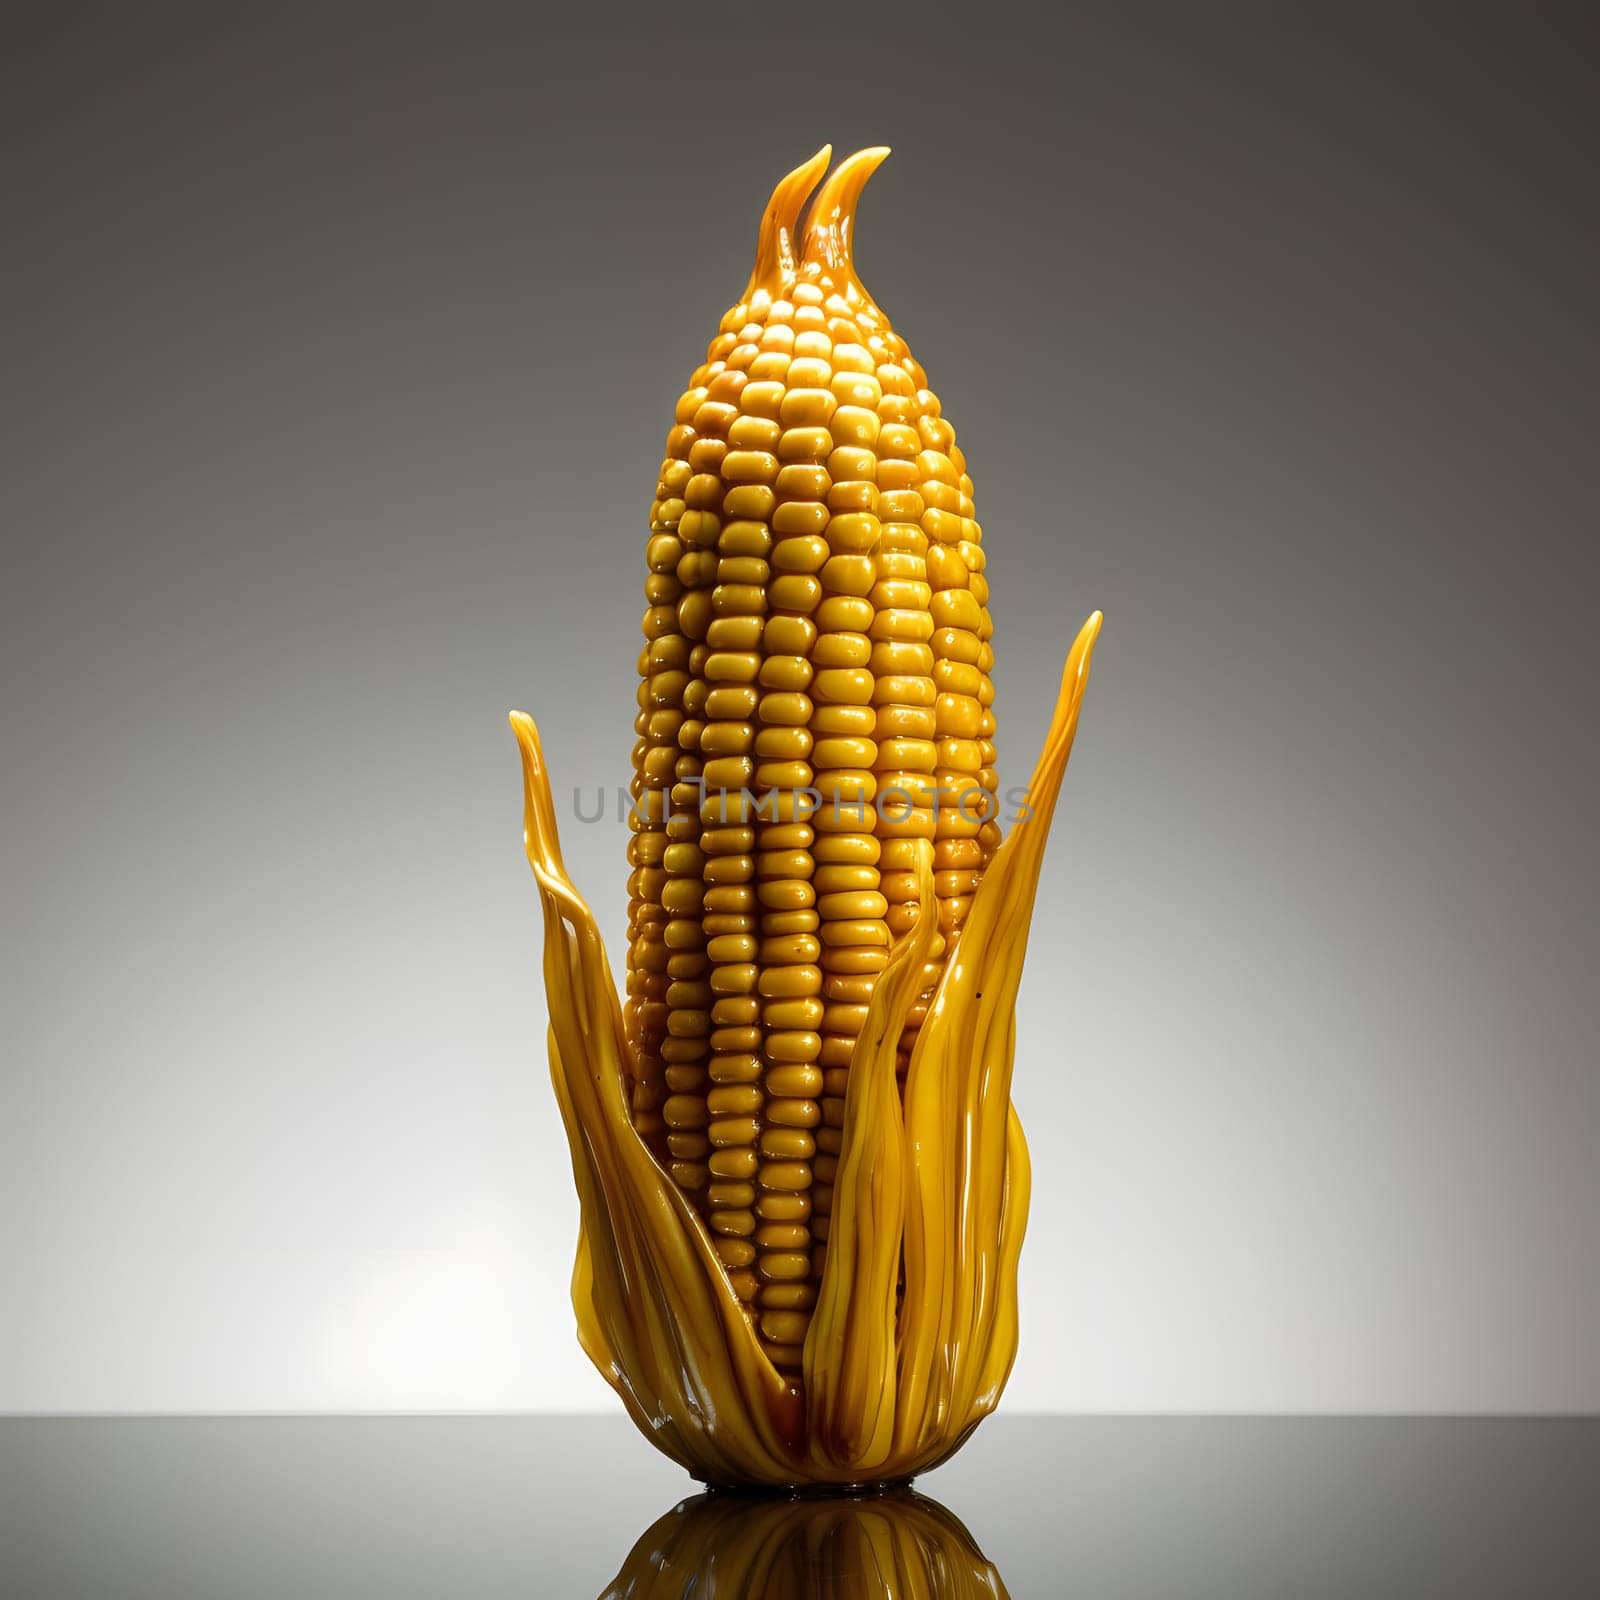 Standing corn cob in leaf old on gray background. Corn as a dish of thanksgiving for the harvest. An atmosphere of joy and celebration.